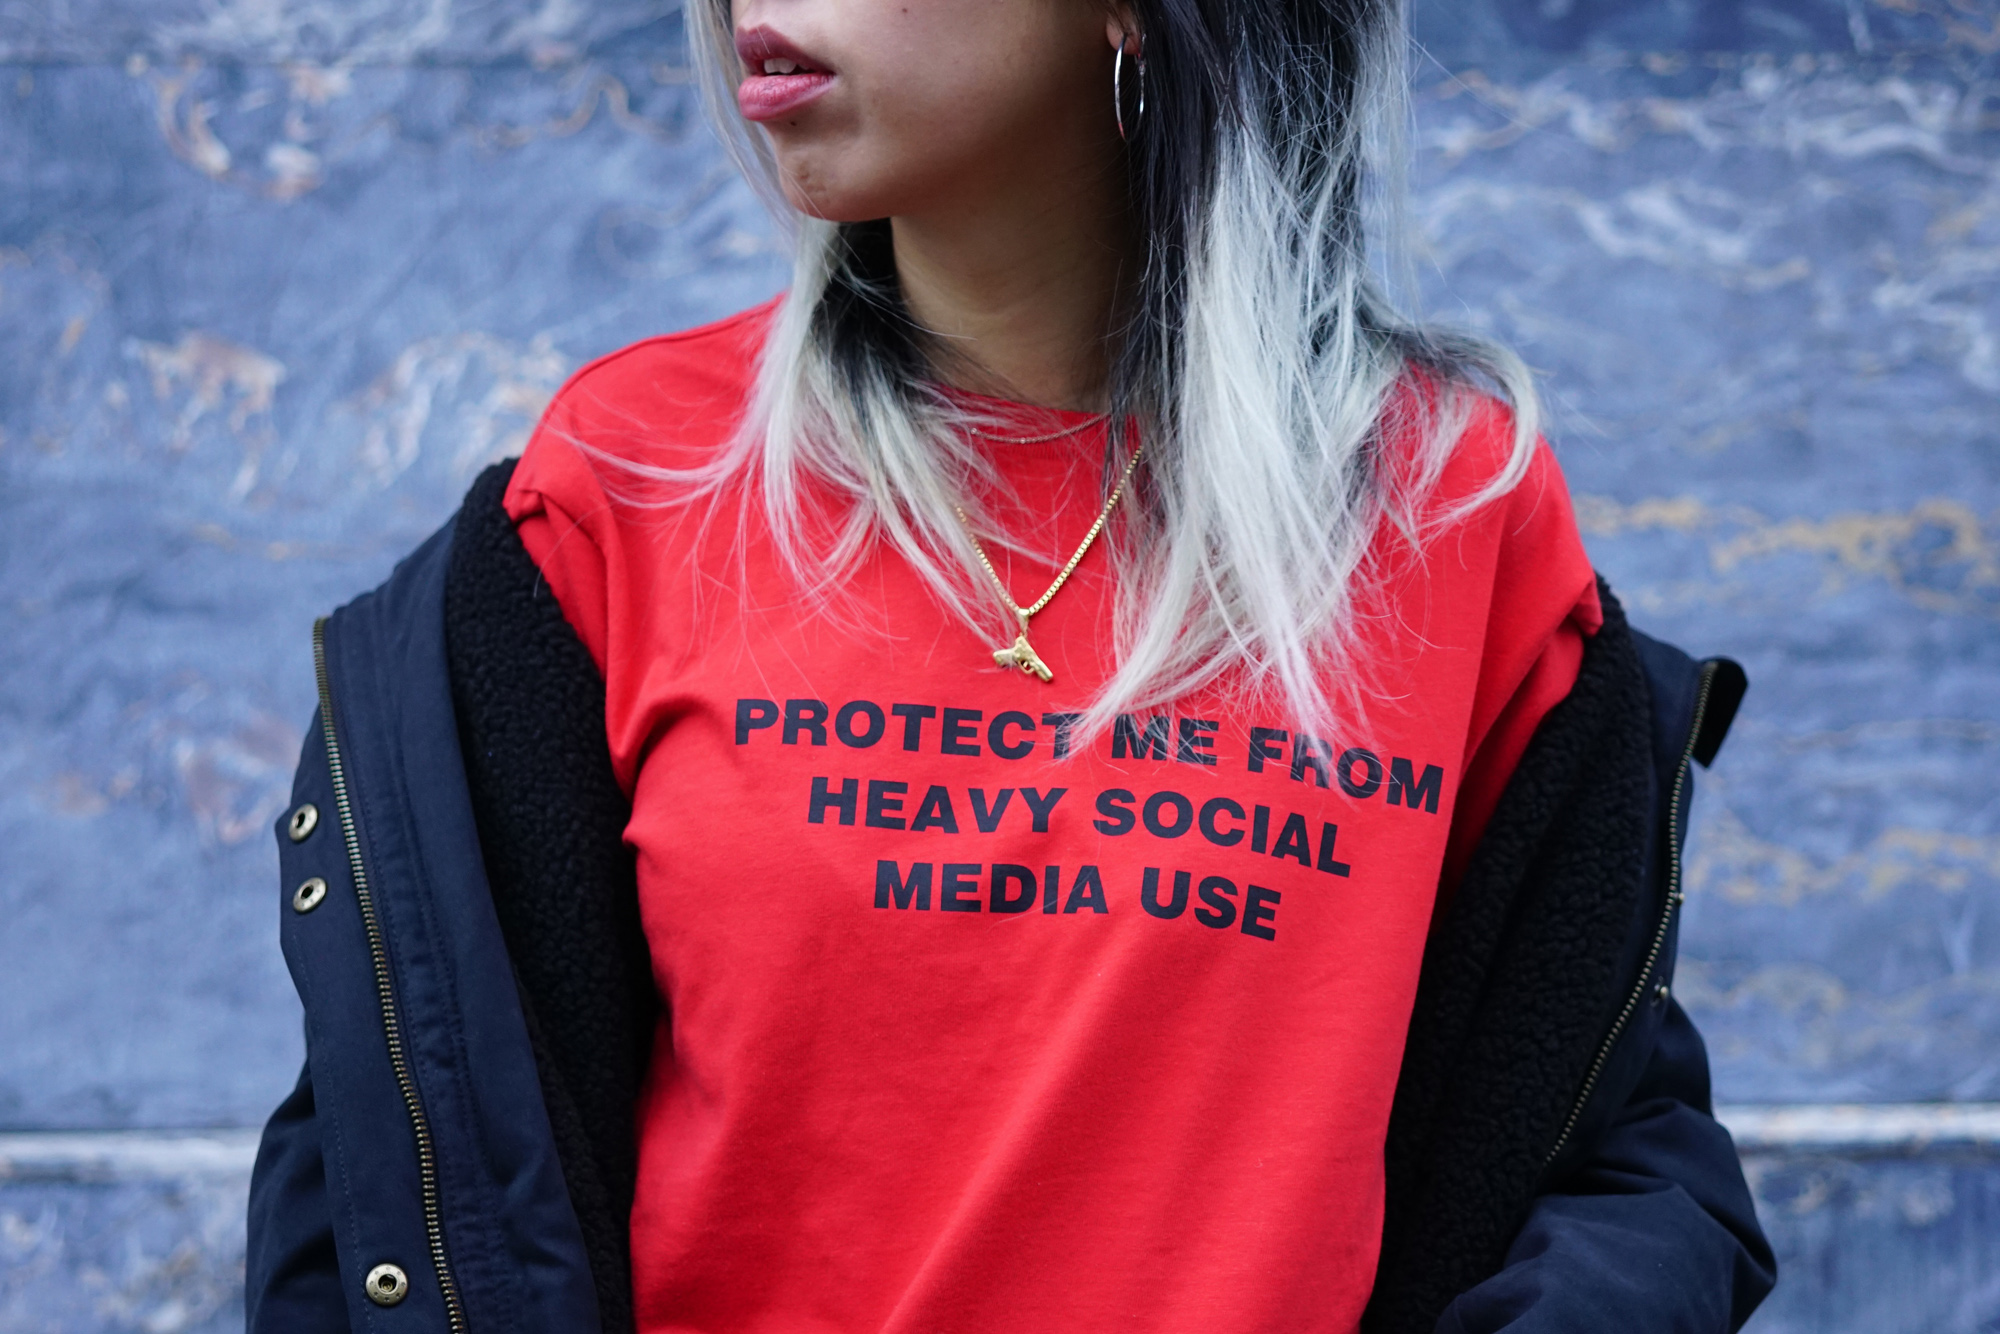 Protect me from heavy social media use Weekday